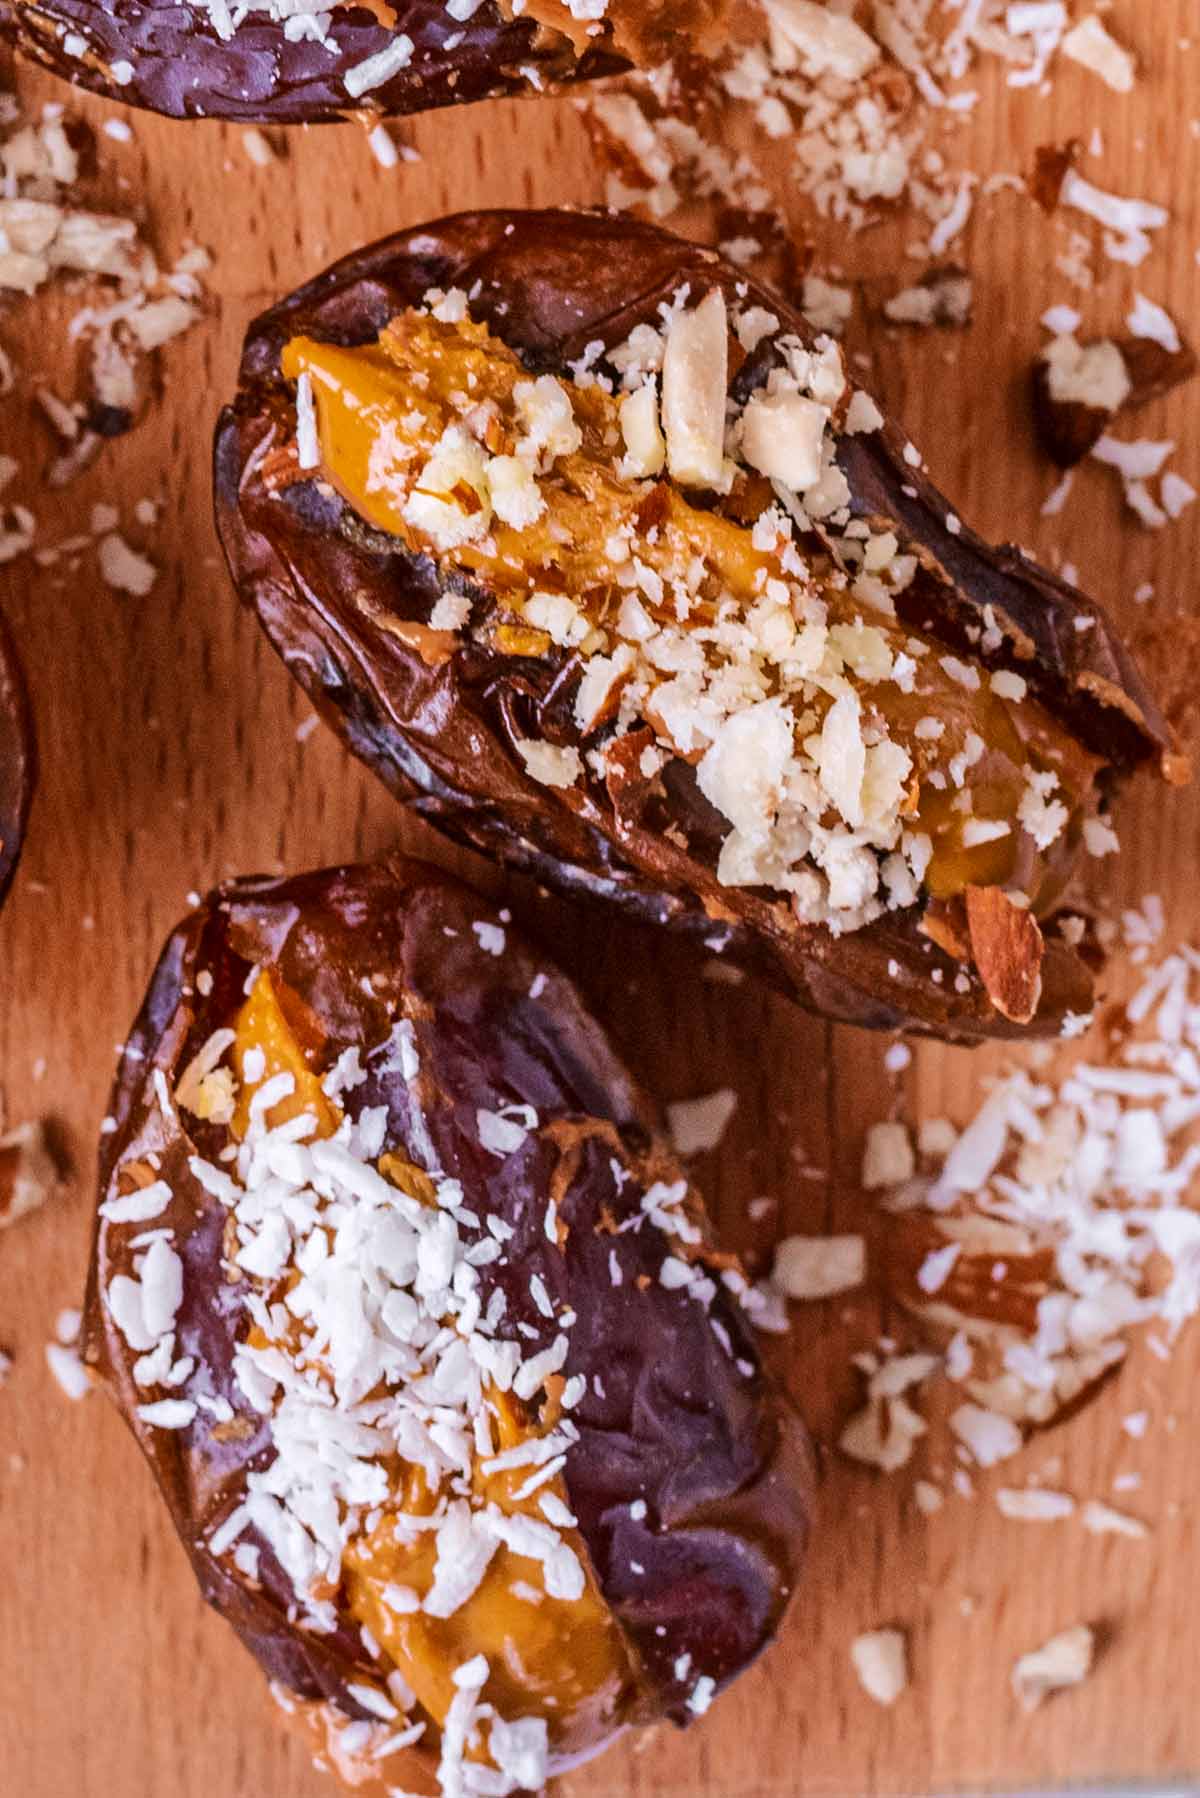 Two medjool dates stuffed with peanut butter with crushed nuts and desiccated coconut on them.